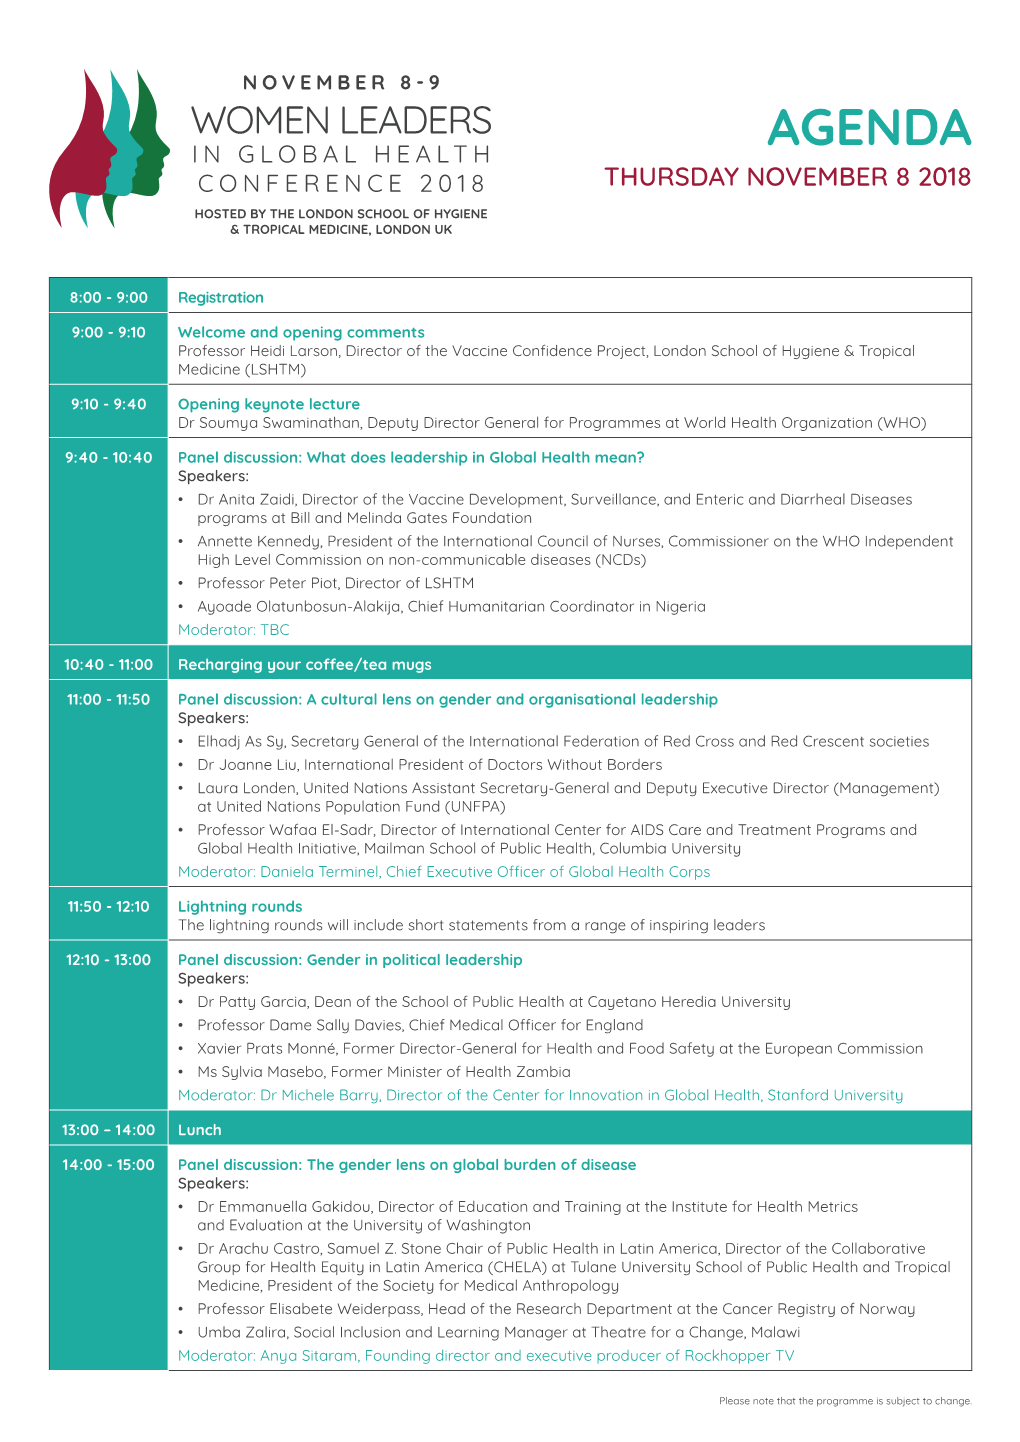 Agenda Conference 2018 Thursday November 8 2018 Hosted by the London School of Hygiene & Tropical Medicine, London Uk